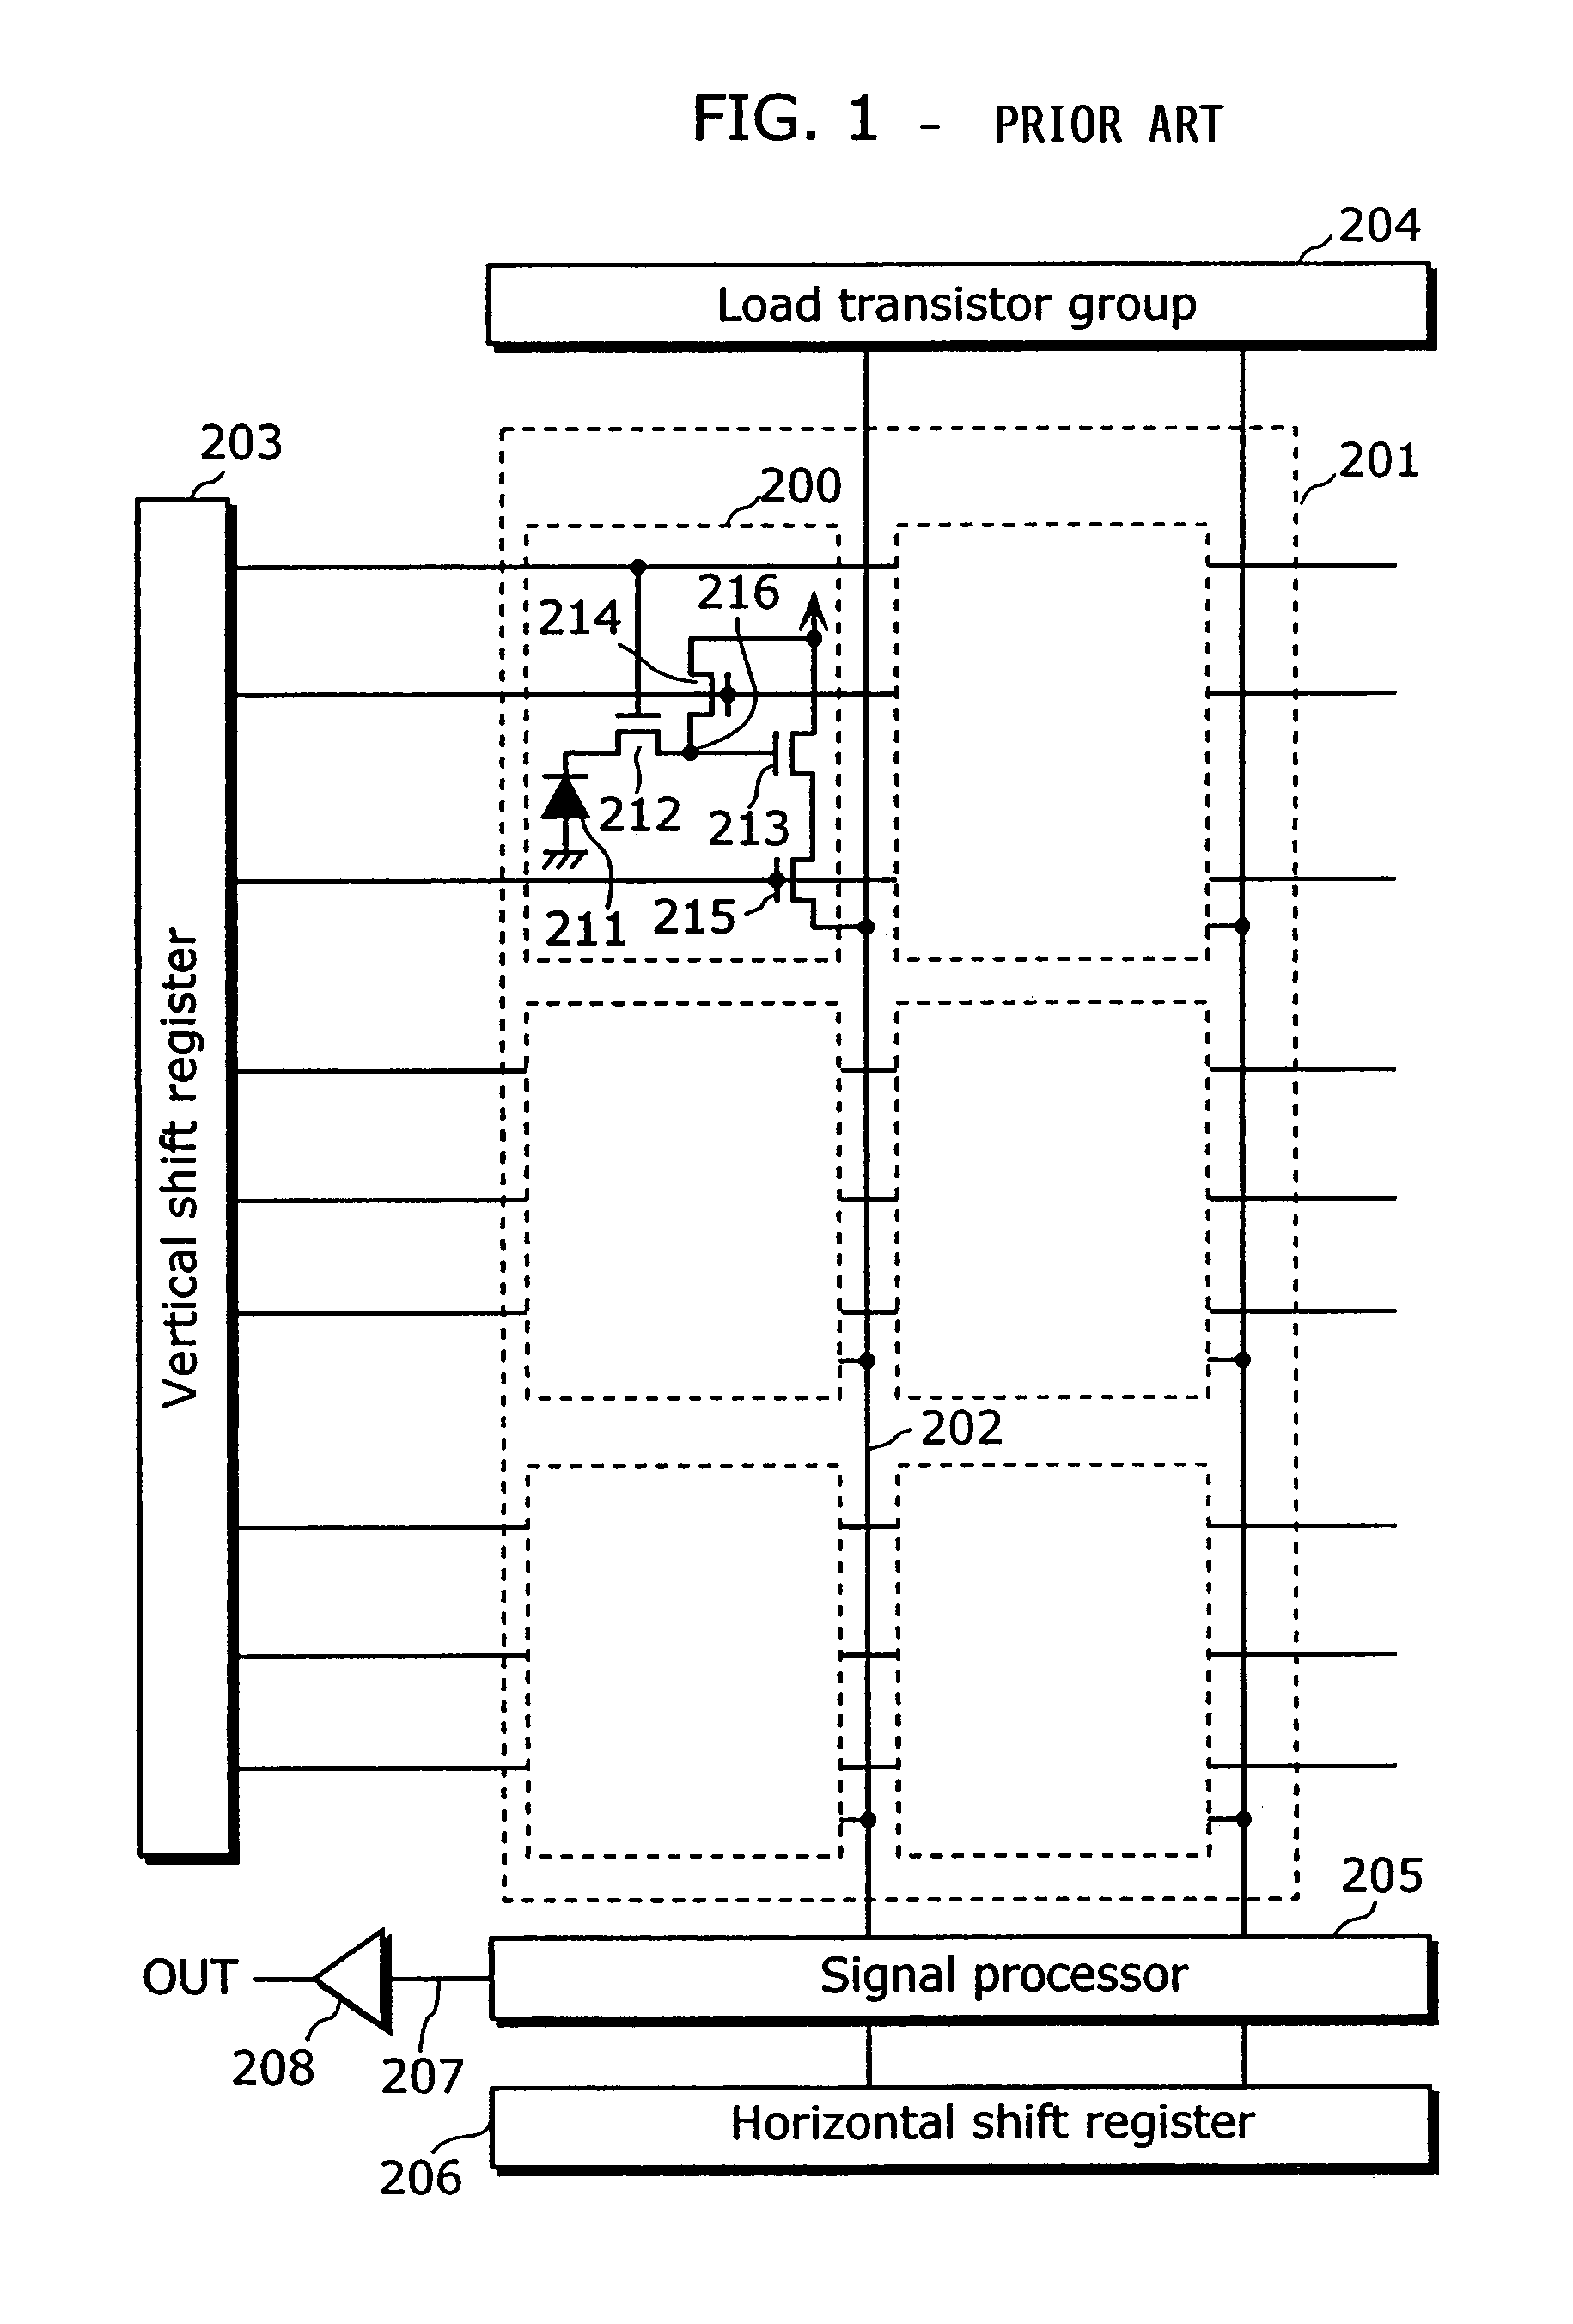 Solid-state imaging device having a punch-through stopper region positioned closer to a signal accumulation region than is an end of the drain region